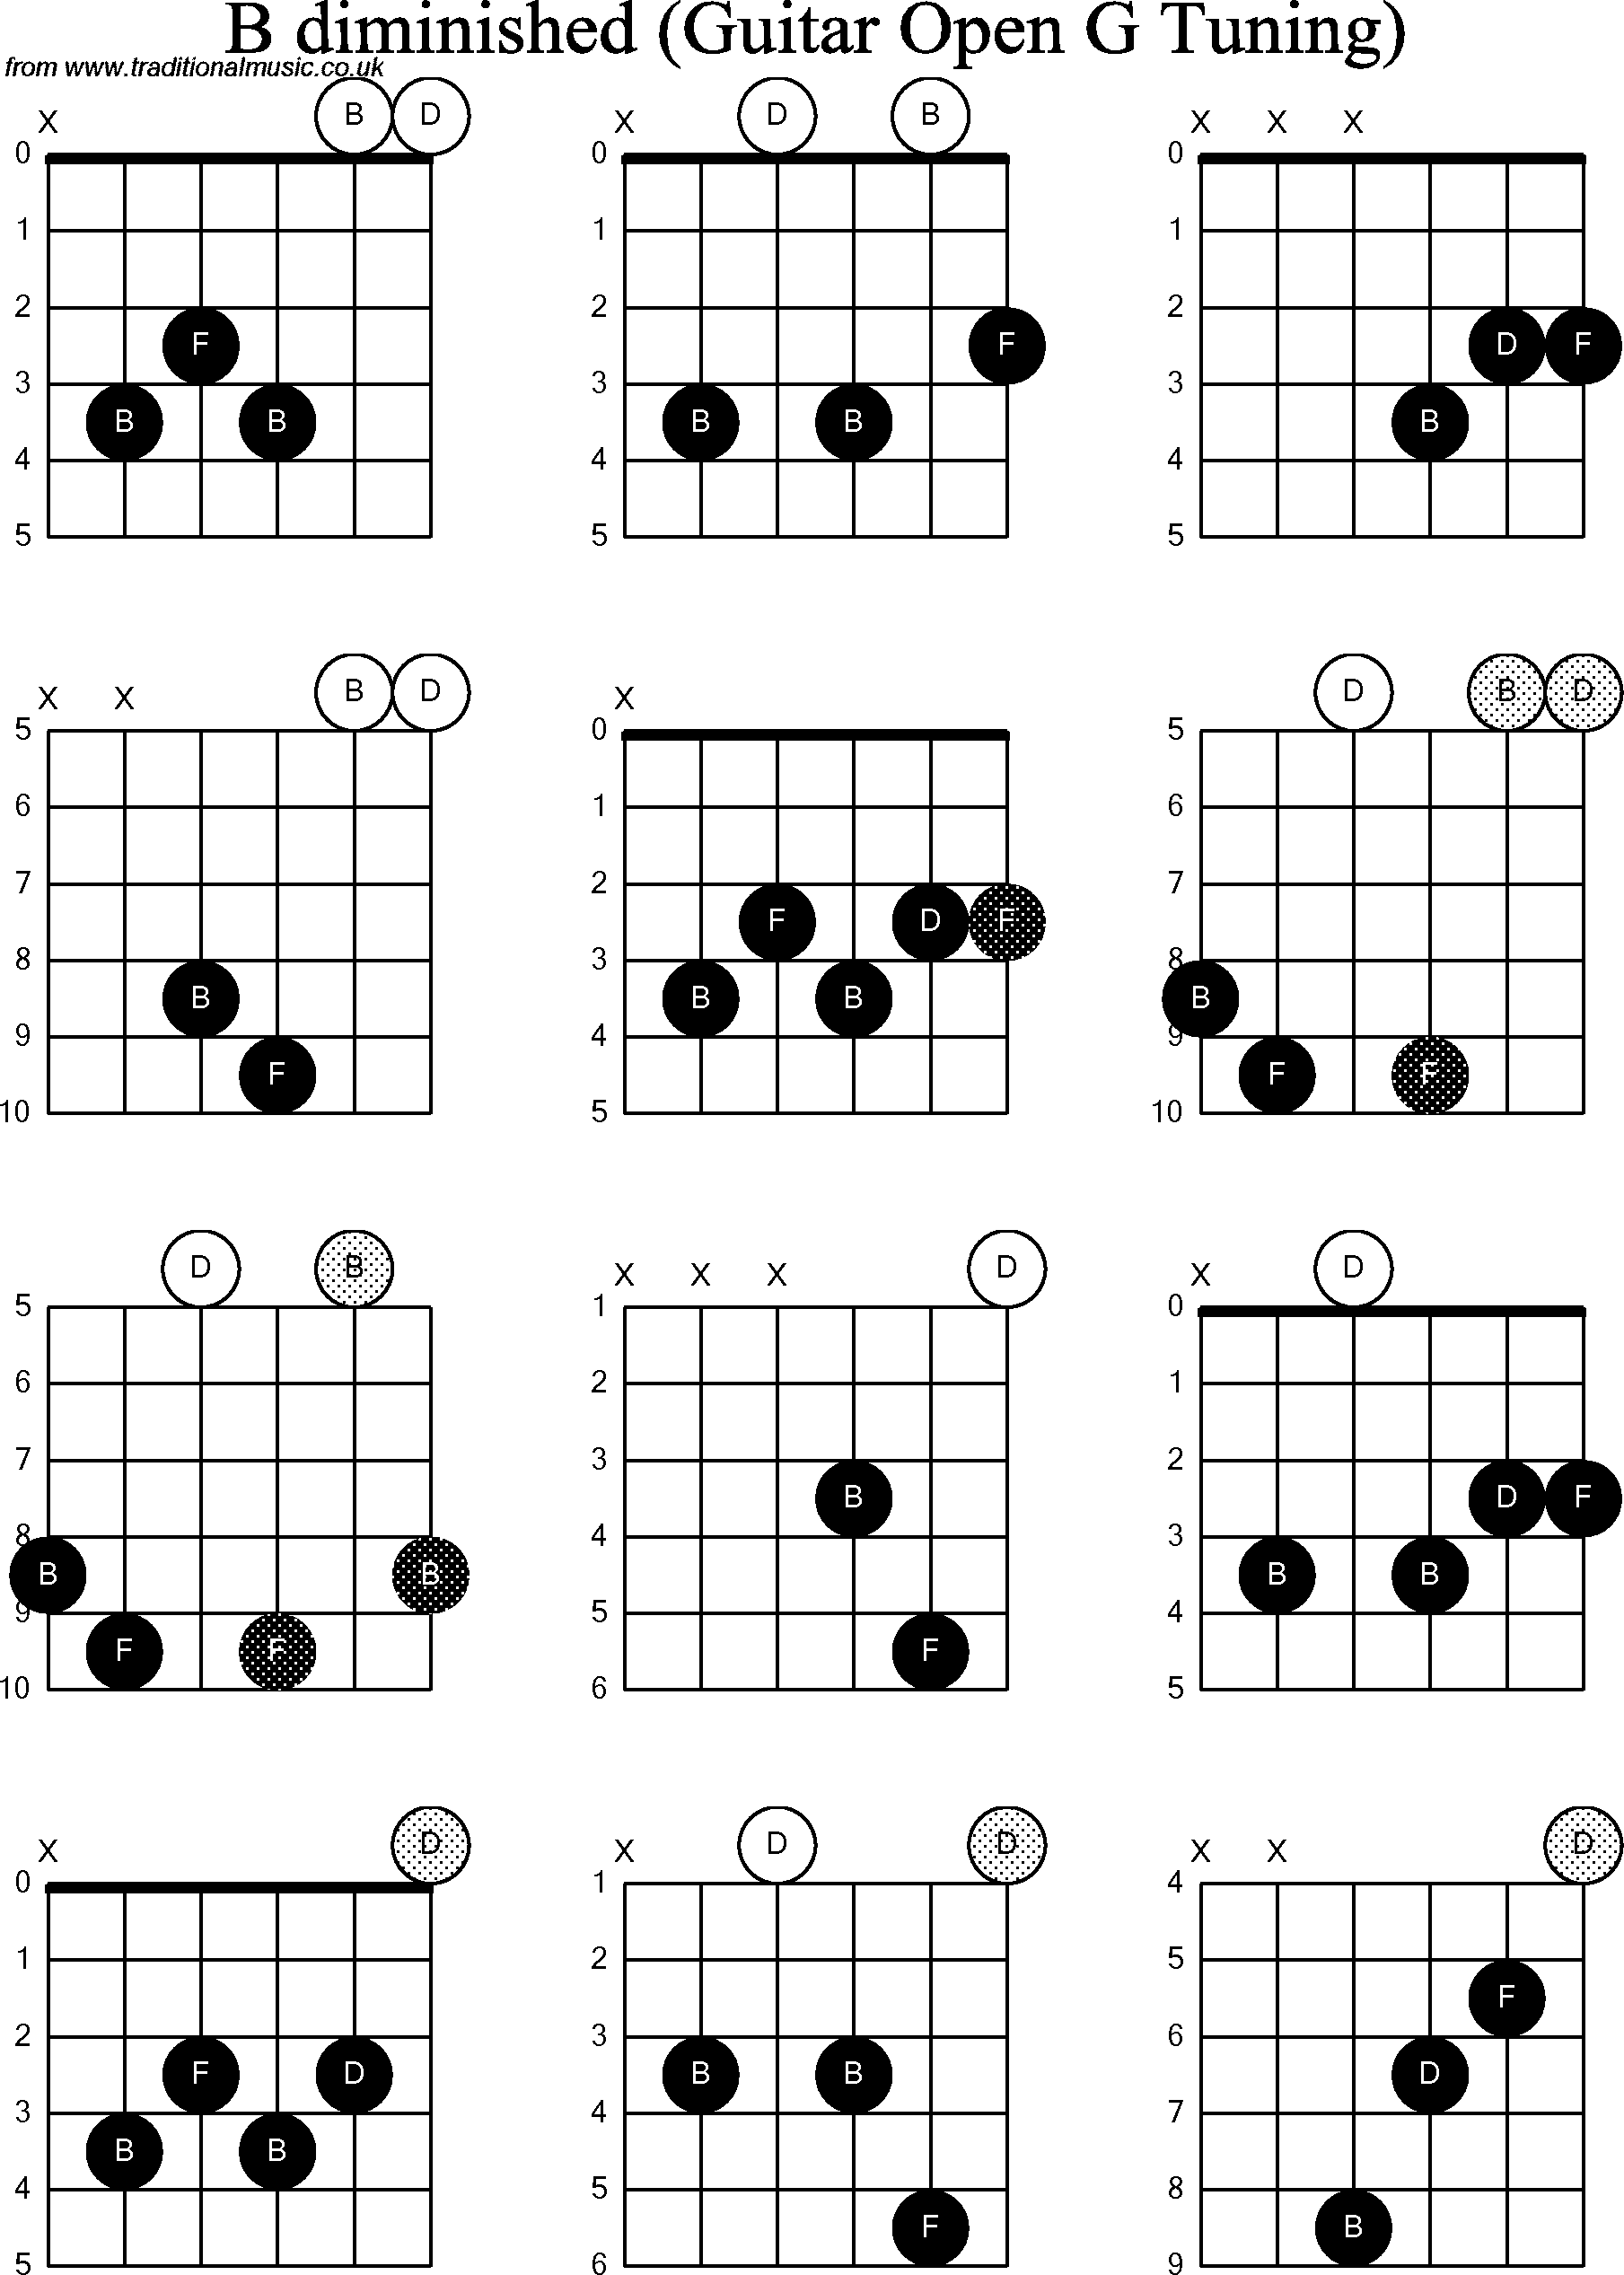 Chord diagrams for Dobro B Diminished